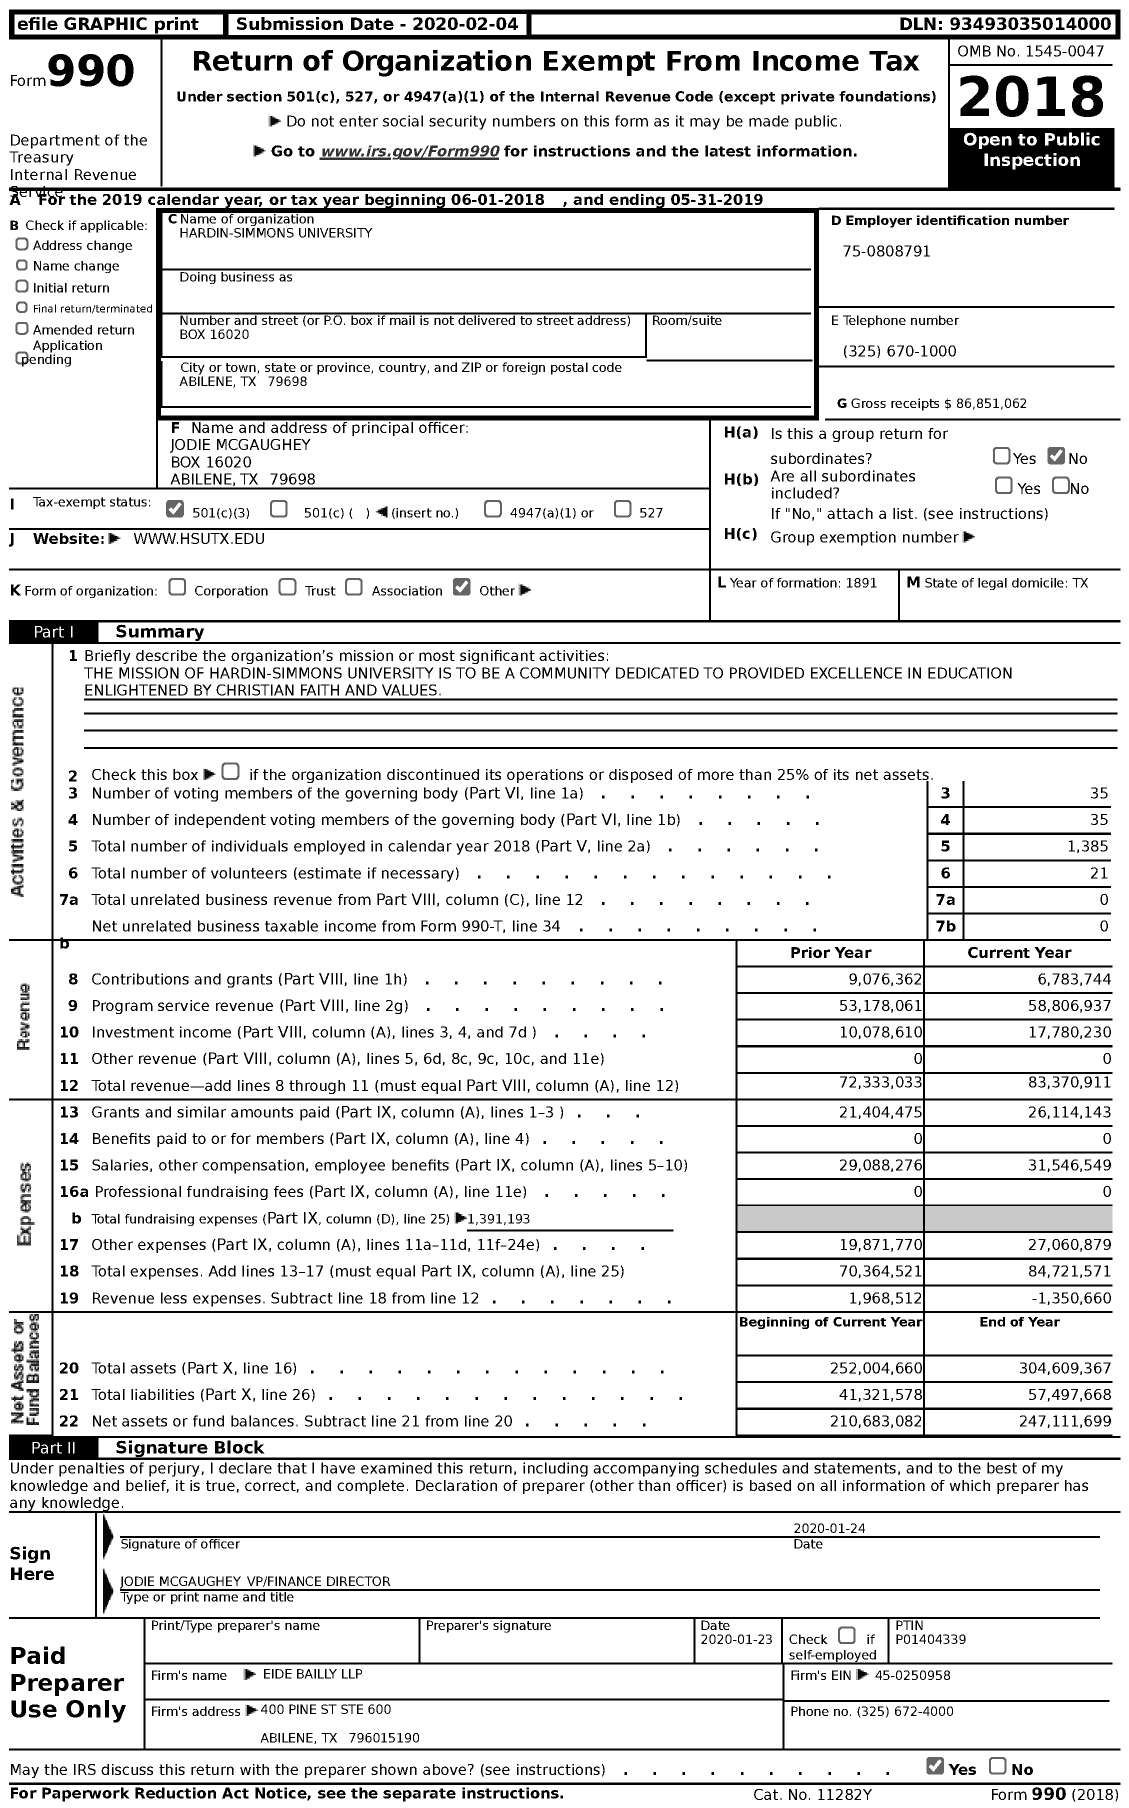 Image of first page of 2018 Form 990 for Hardin-Simmons University (HSU)